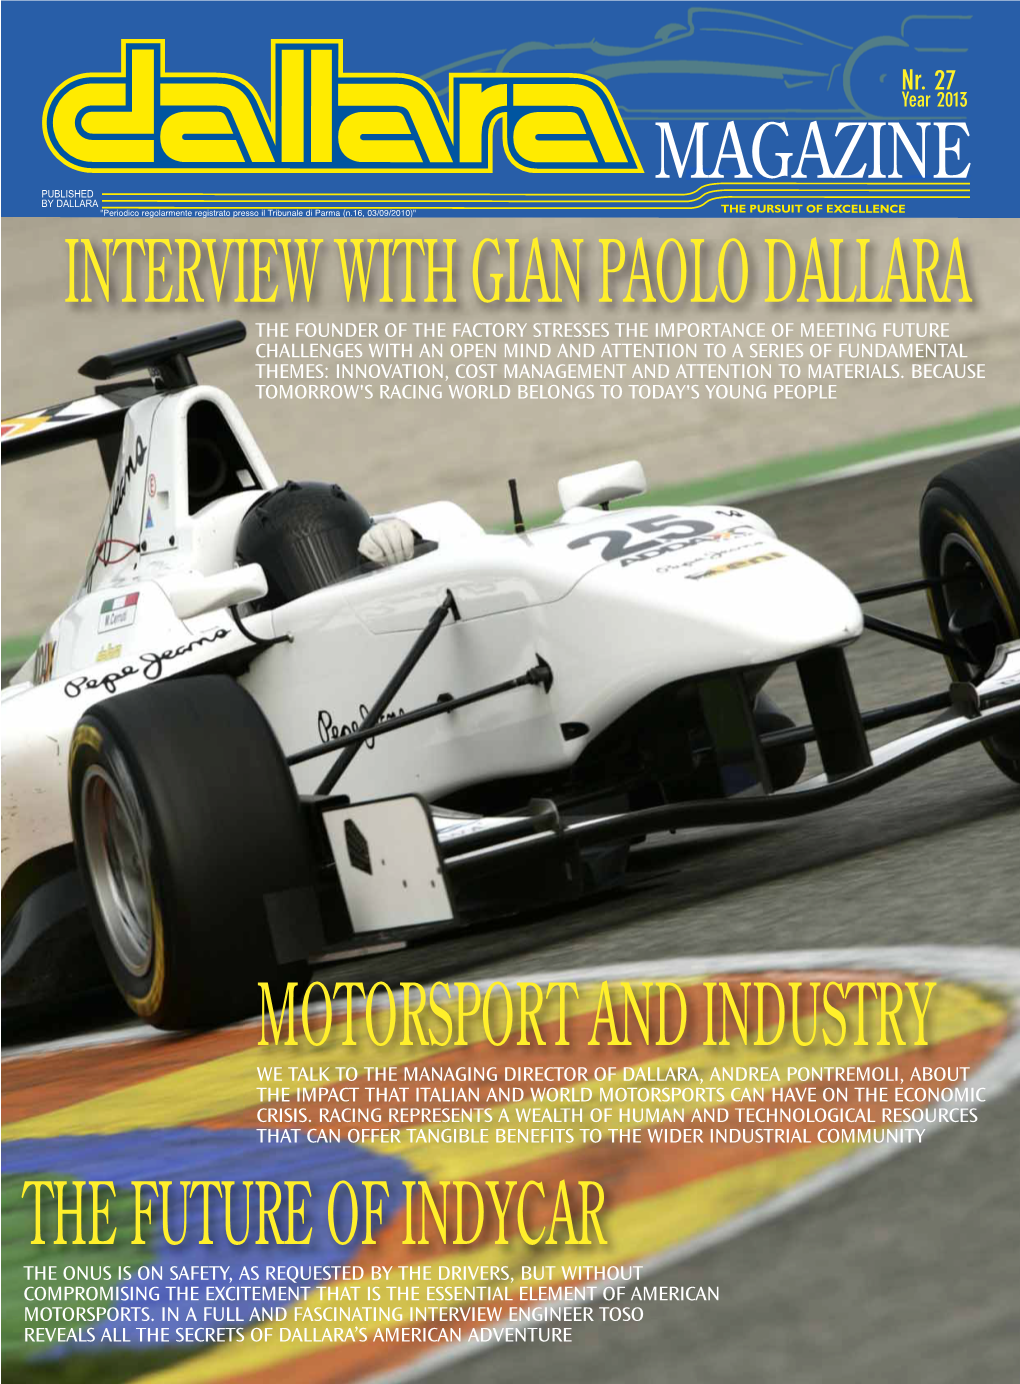 The Future of Indycar Interview with Gian Paolo